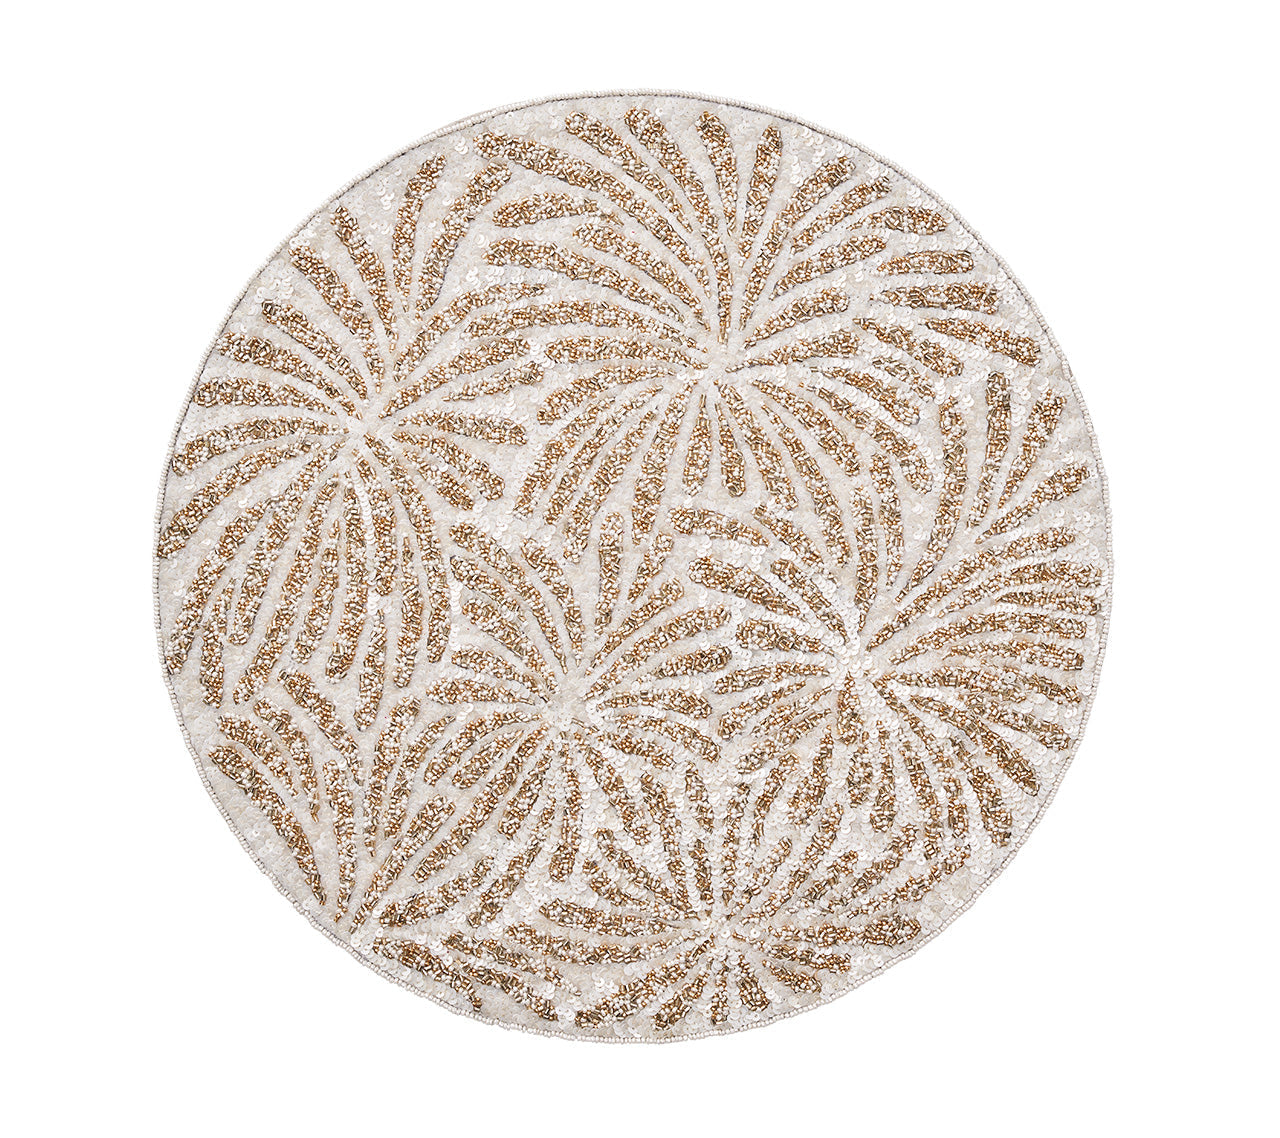 Fireworks Placemat in White, Gold & Silver